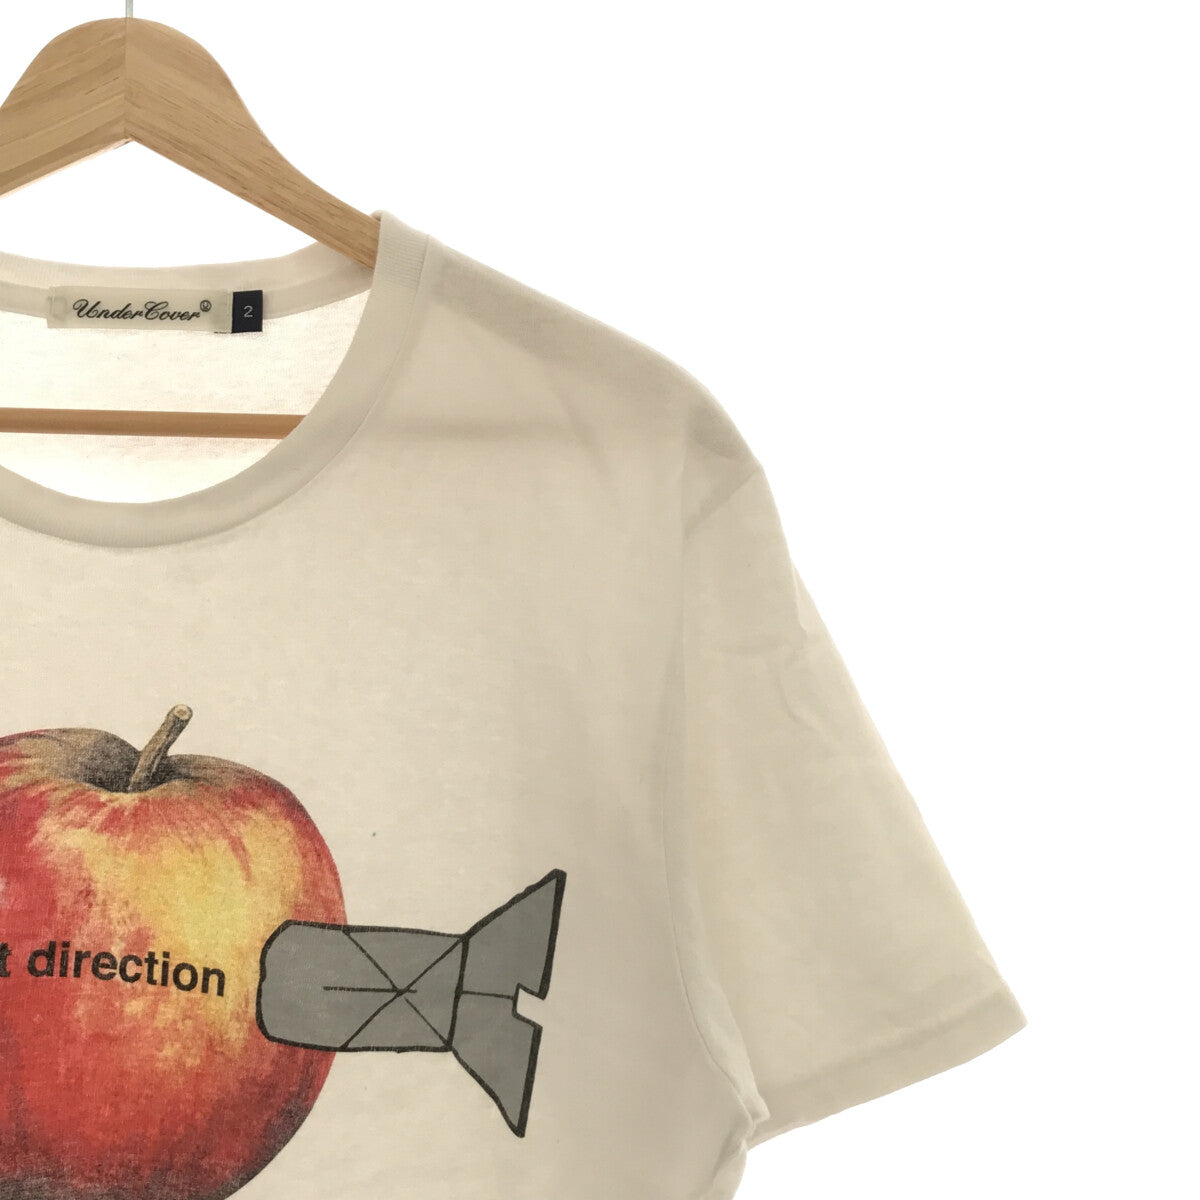 UNDER COVER / アンダーカバー | Right direction Apple Tee